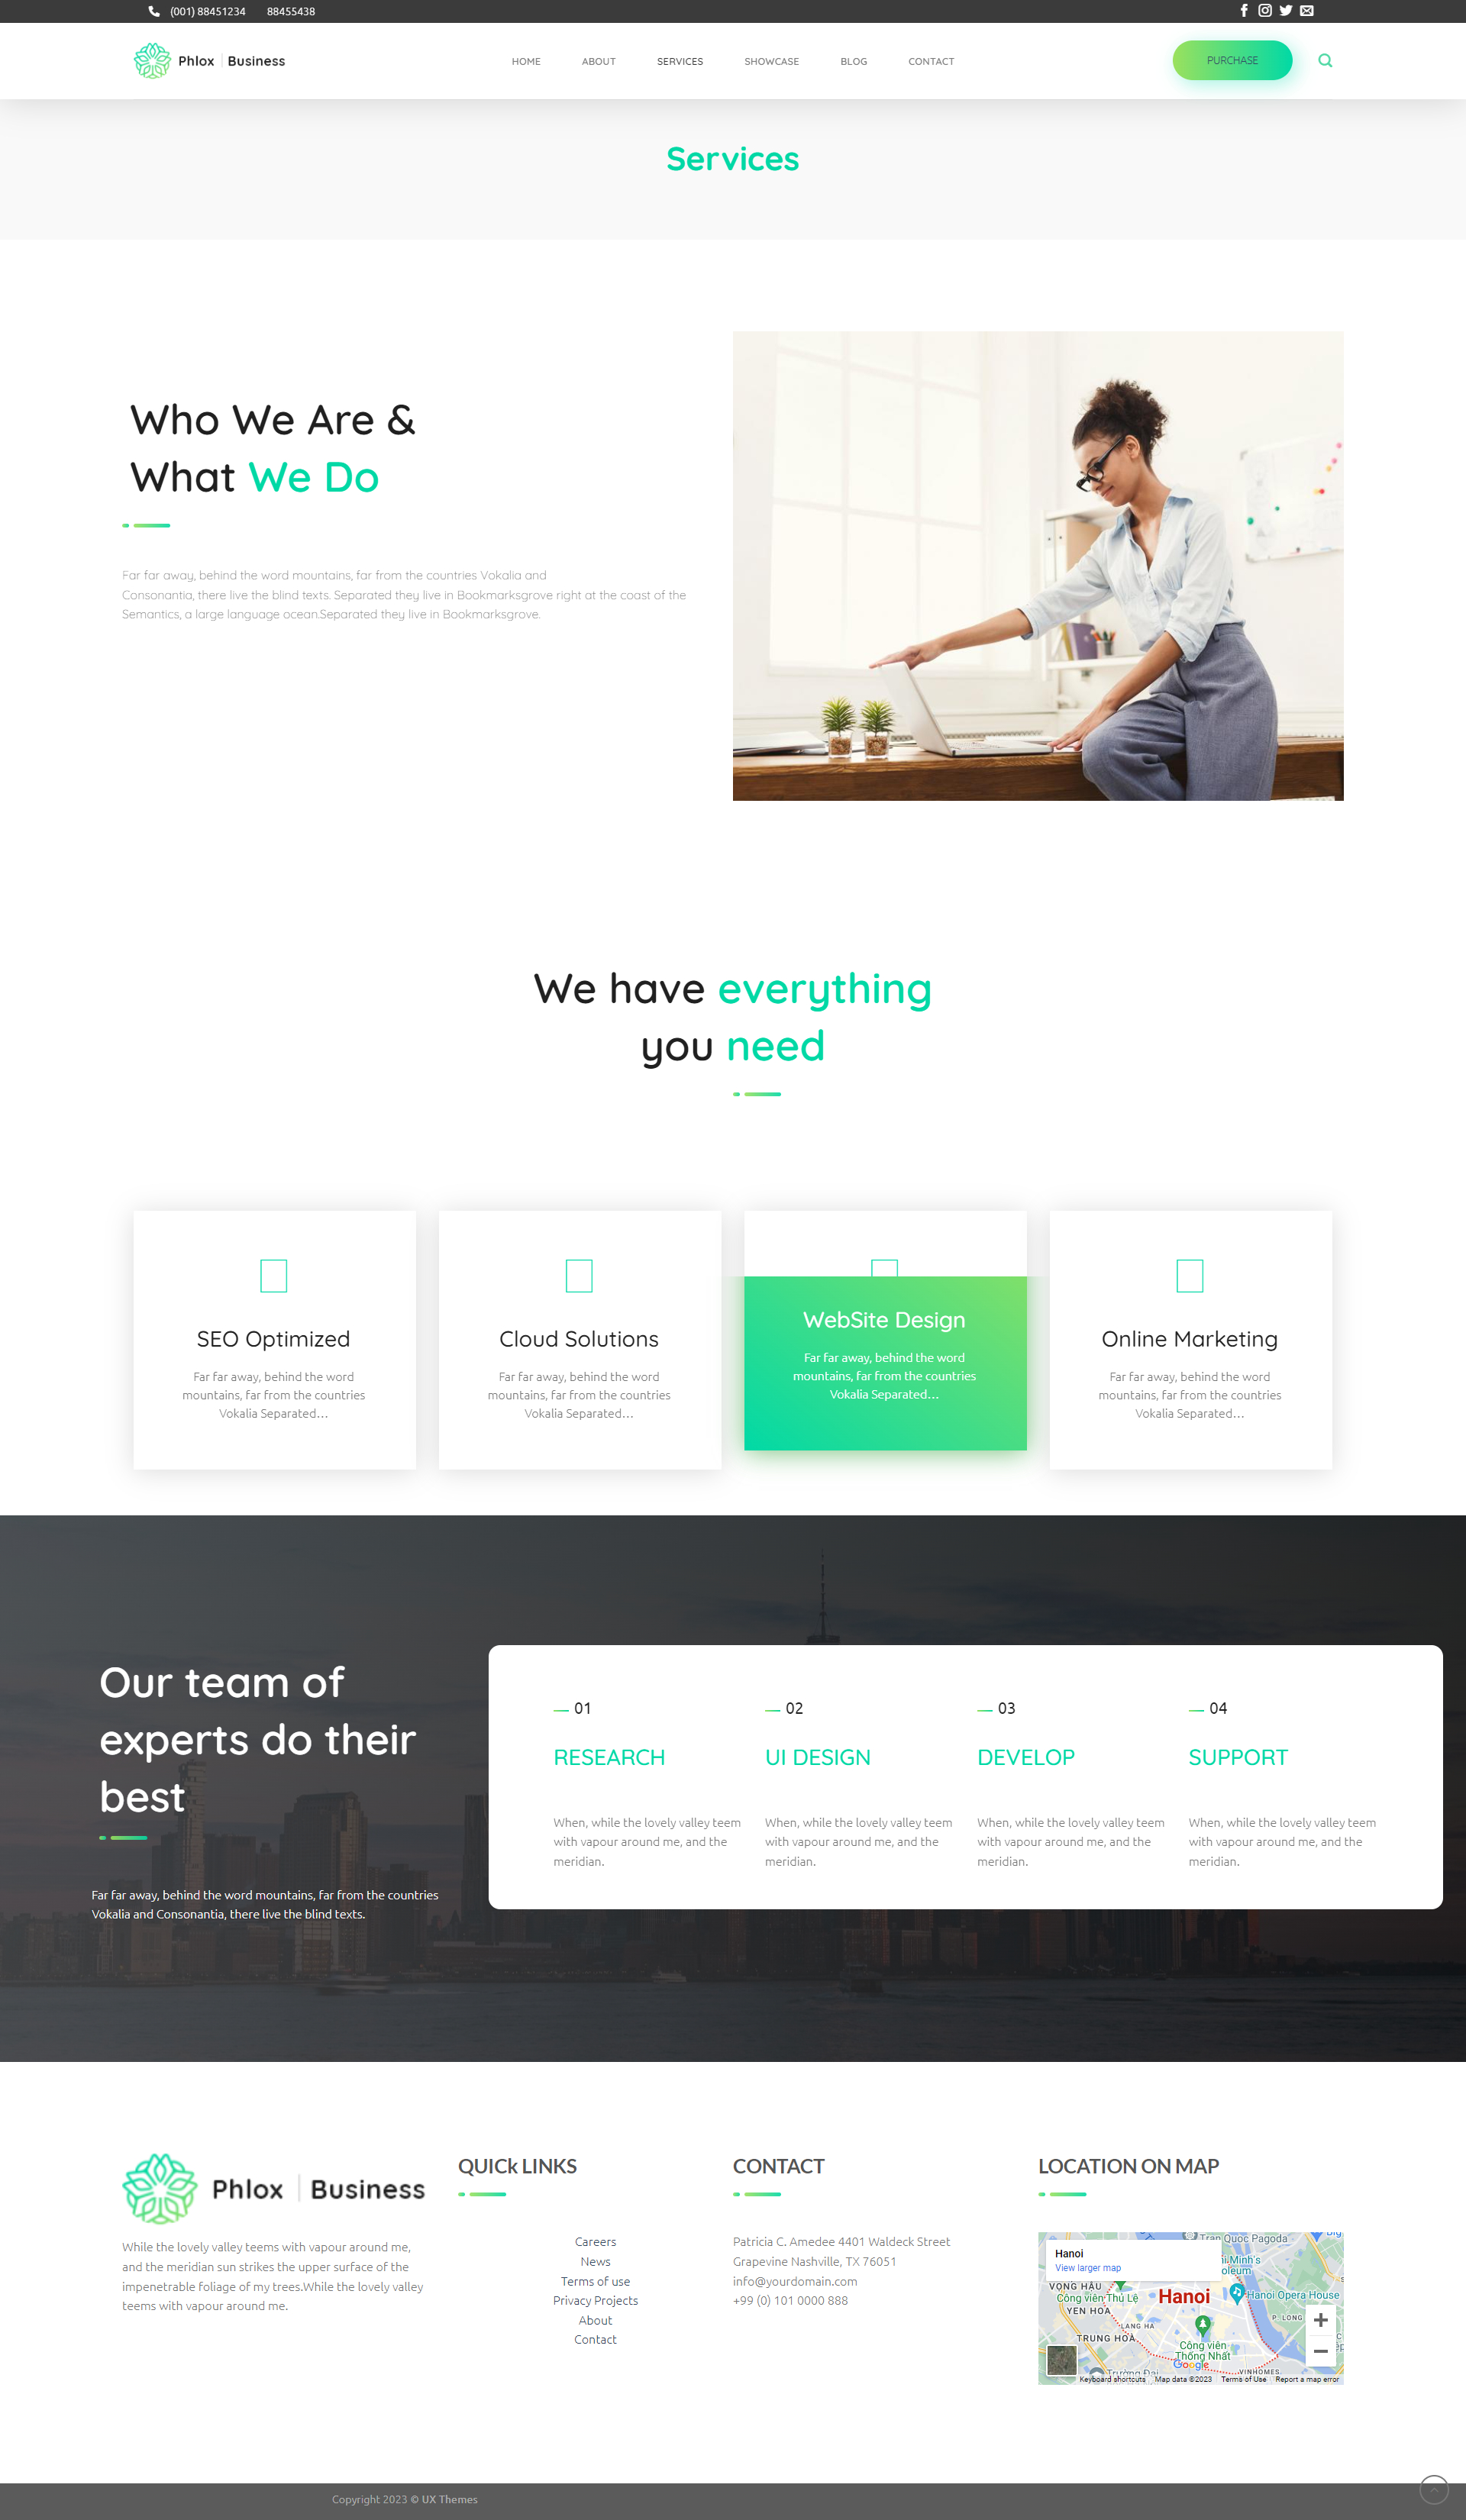 Marketing company introduction website style green